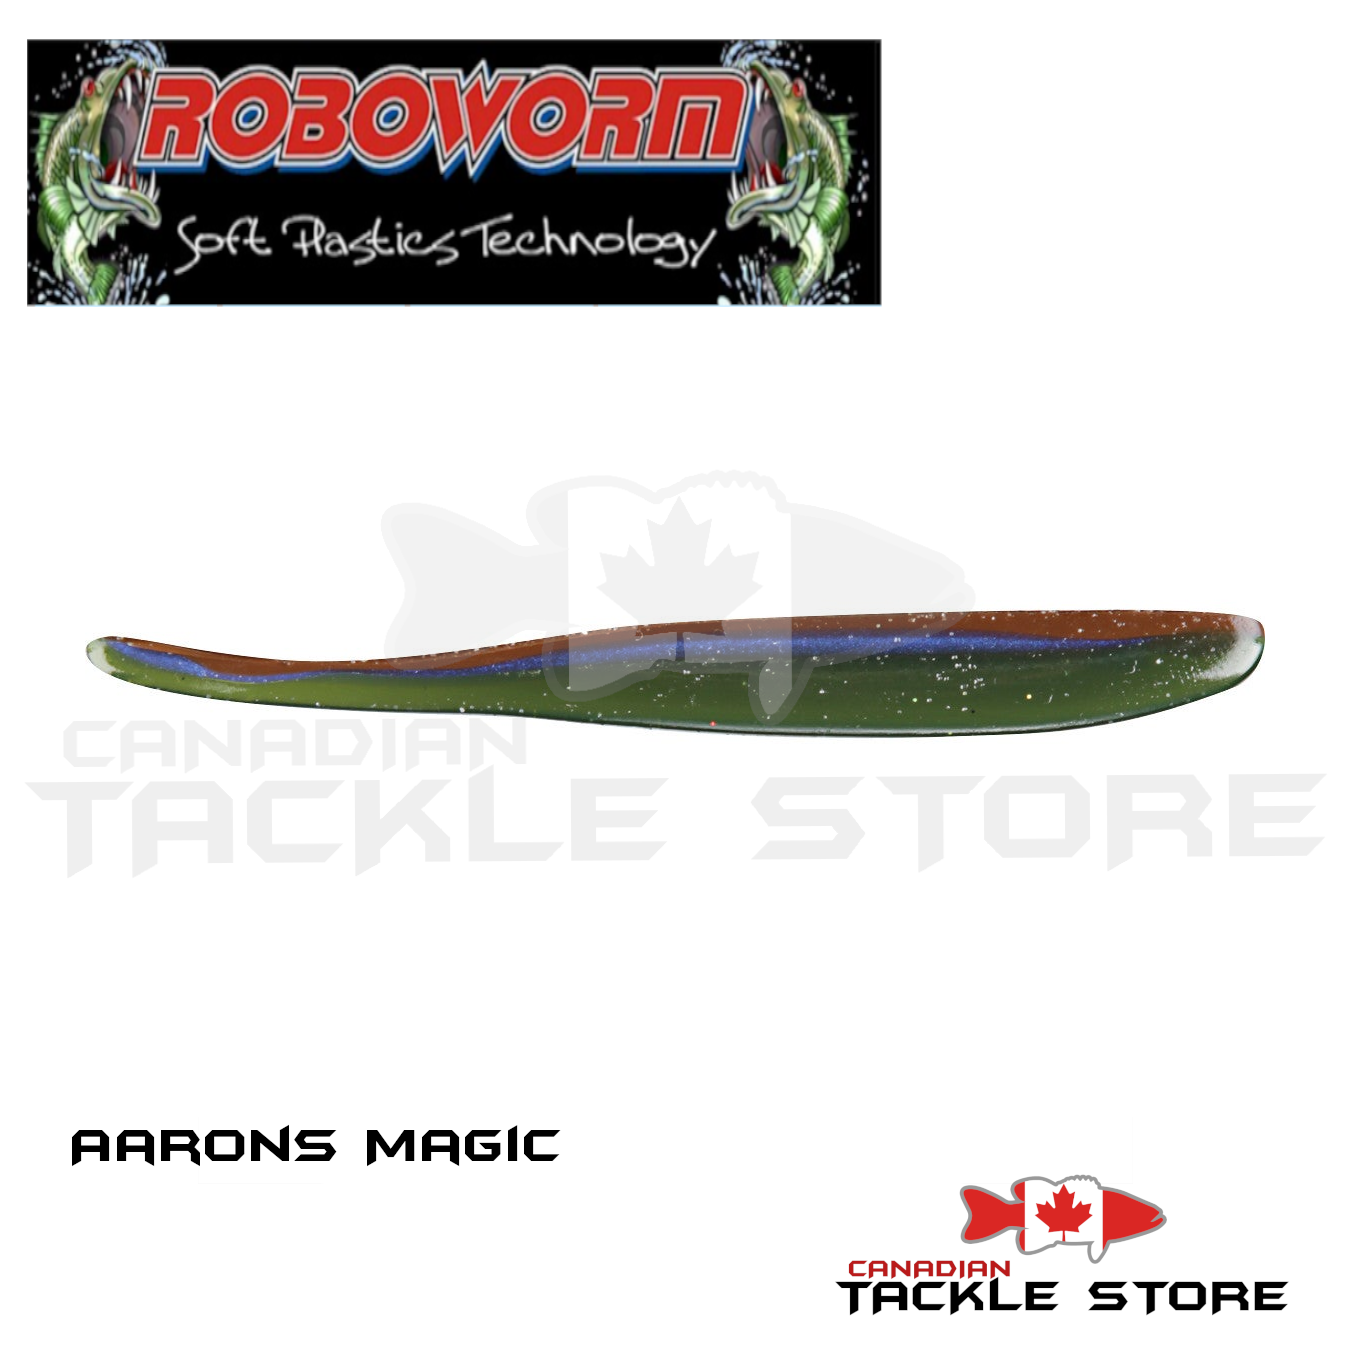 Roboworm Alive Shad – Canadian Tackle Store